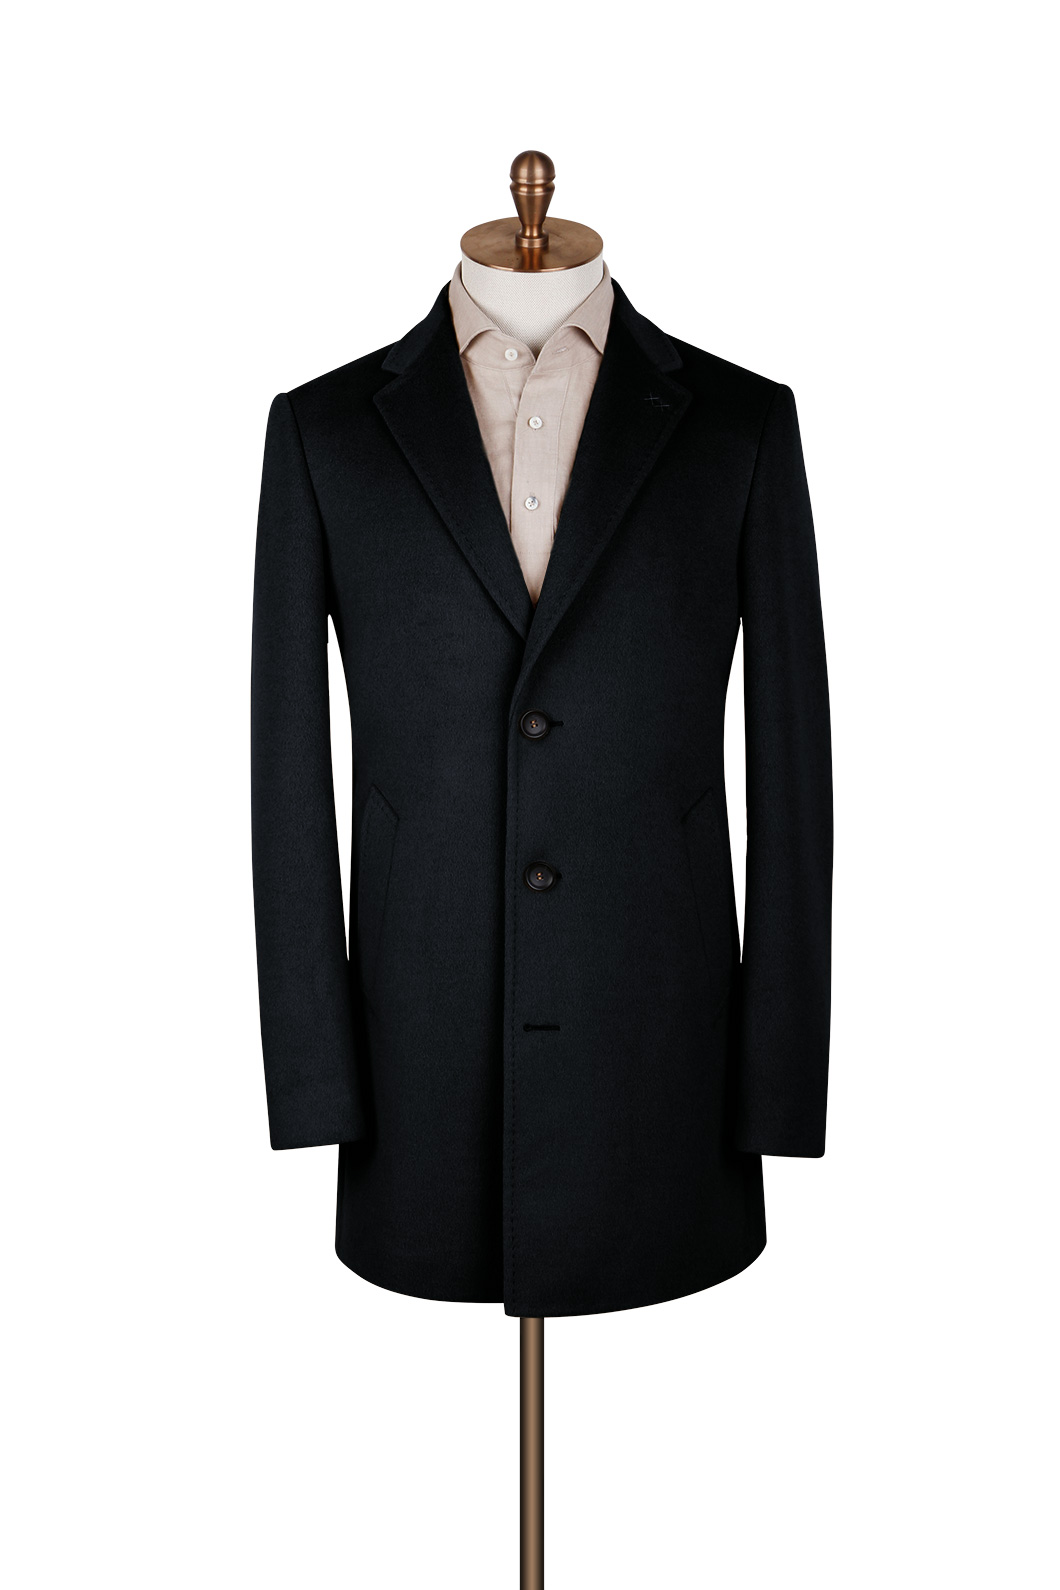 LORO PIANA Double-Breasted Rain System Linen Suit Jacket for Men